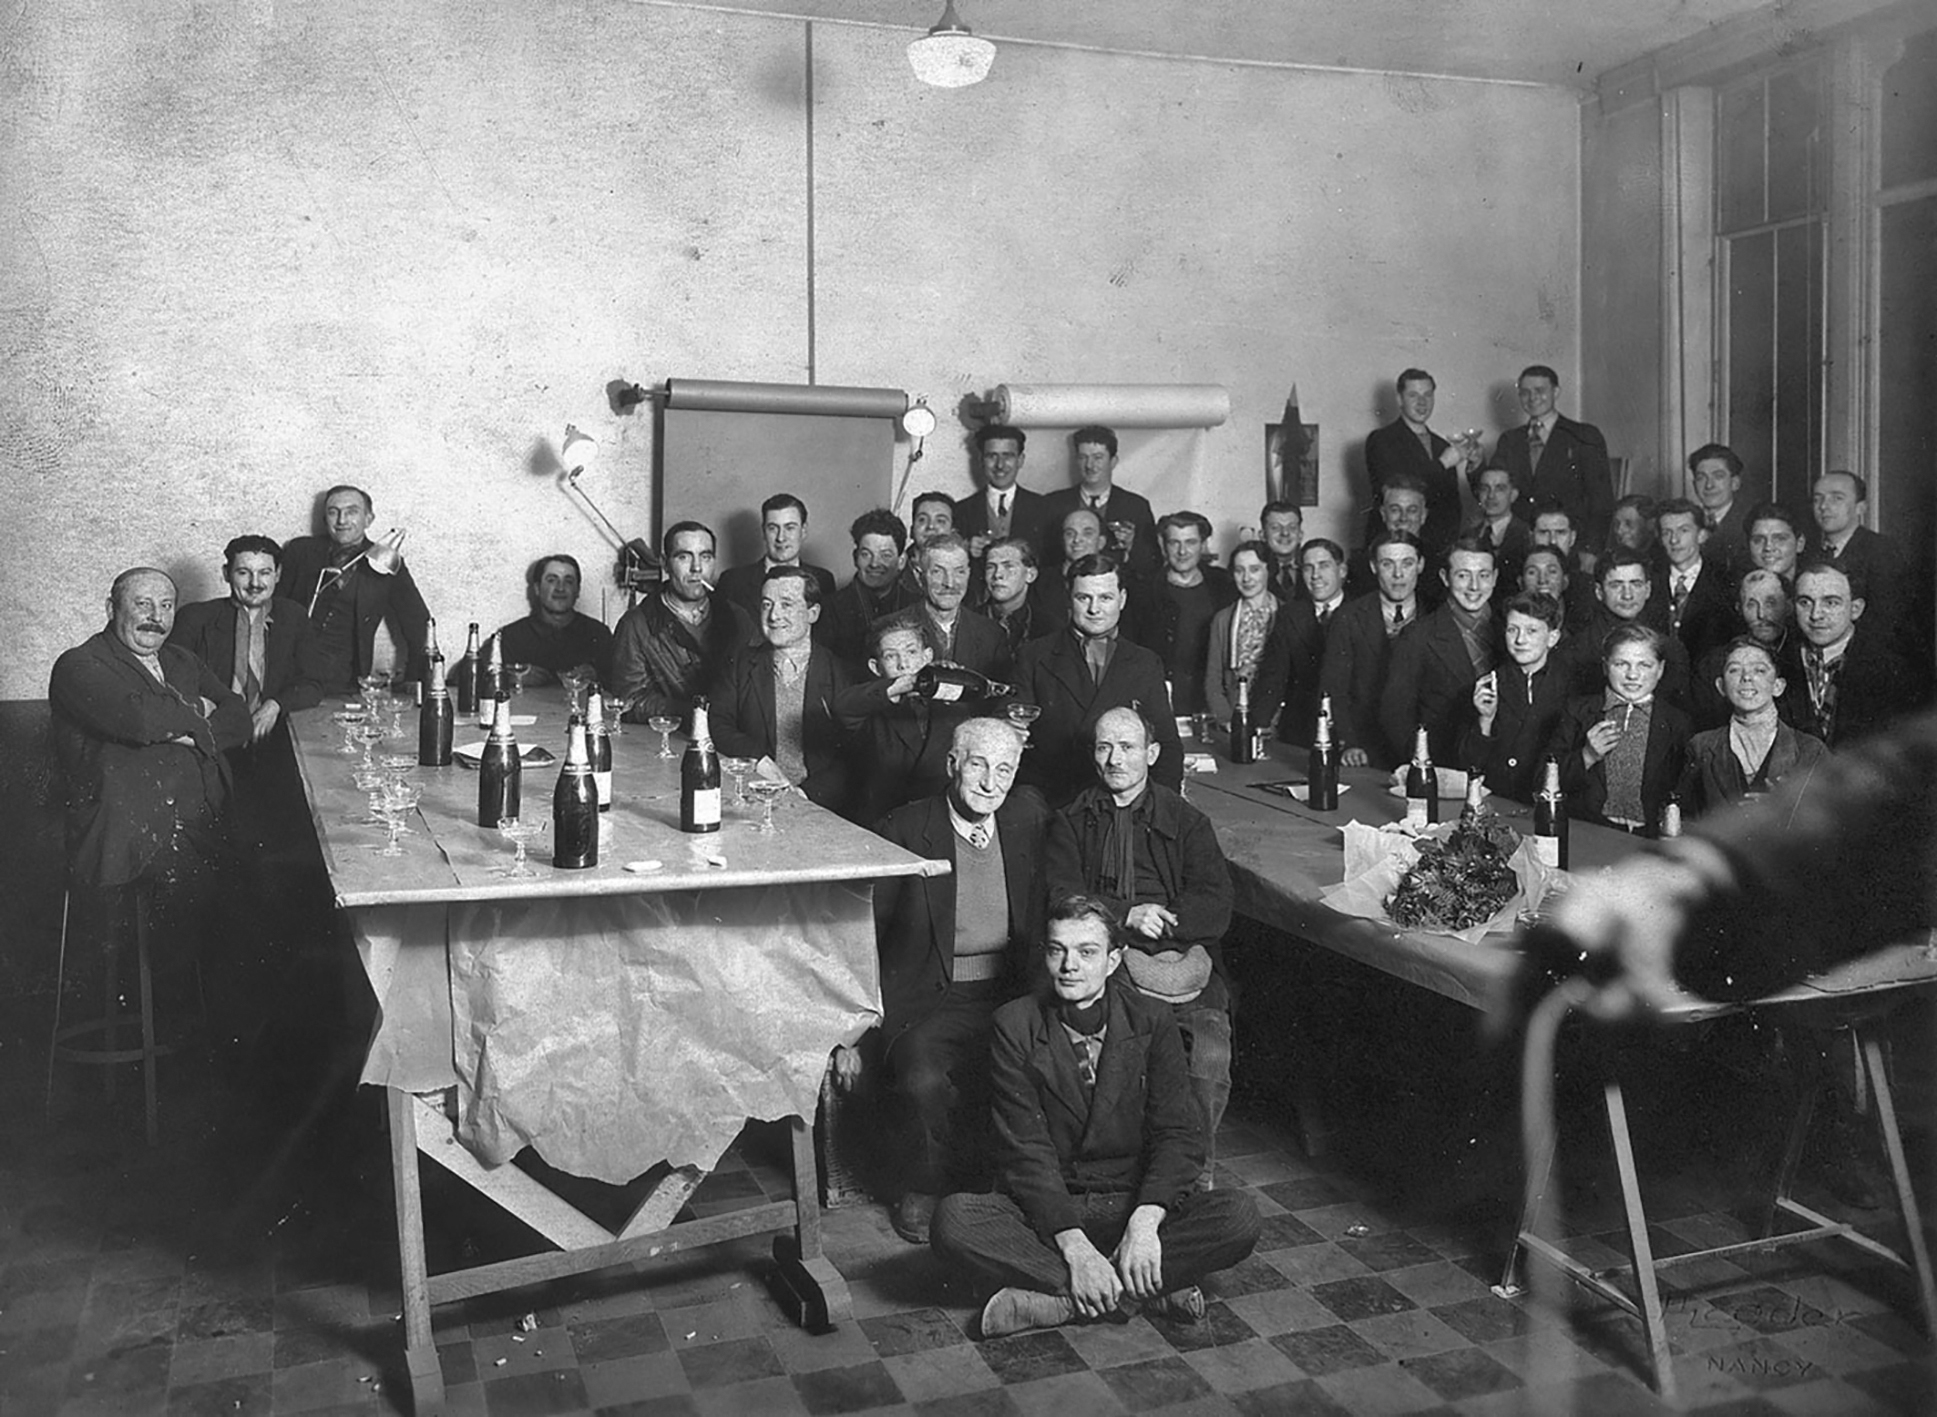 Celebrating the feast of St Eligius, patron saint of metalworkers and blacksmiths, in the design office, c. 1932.